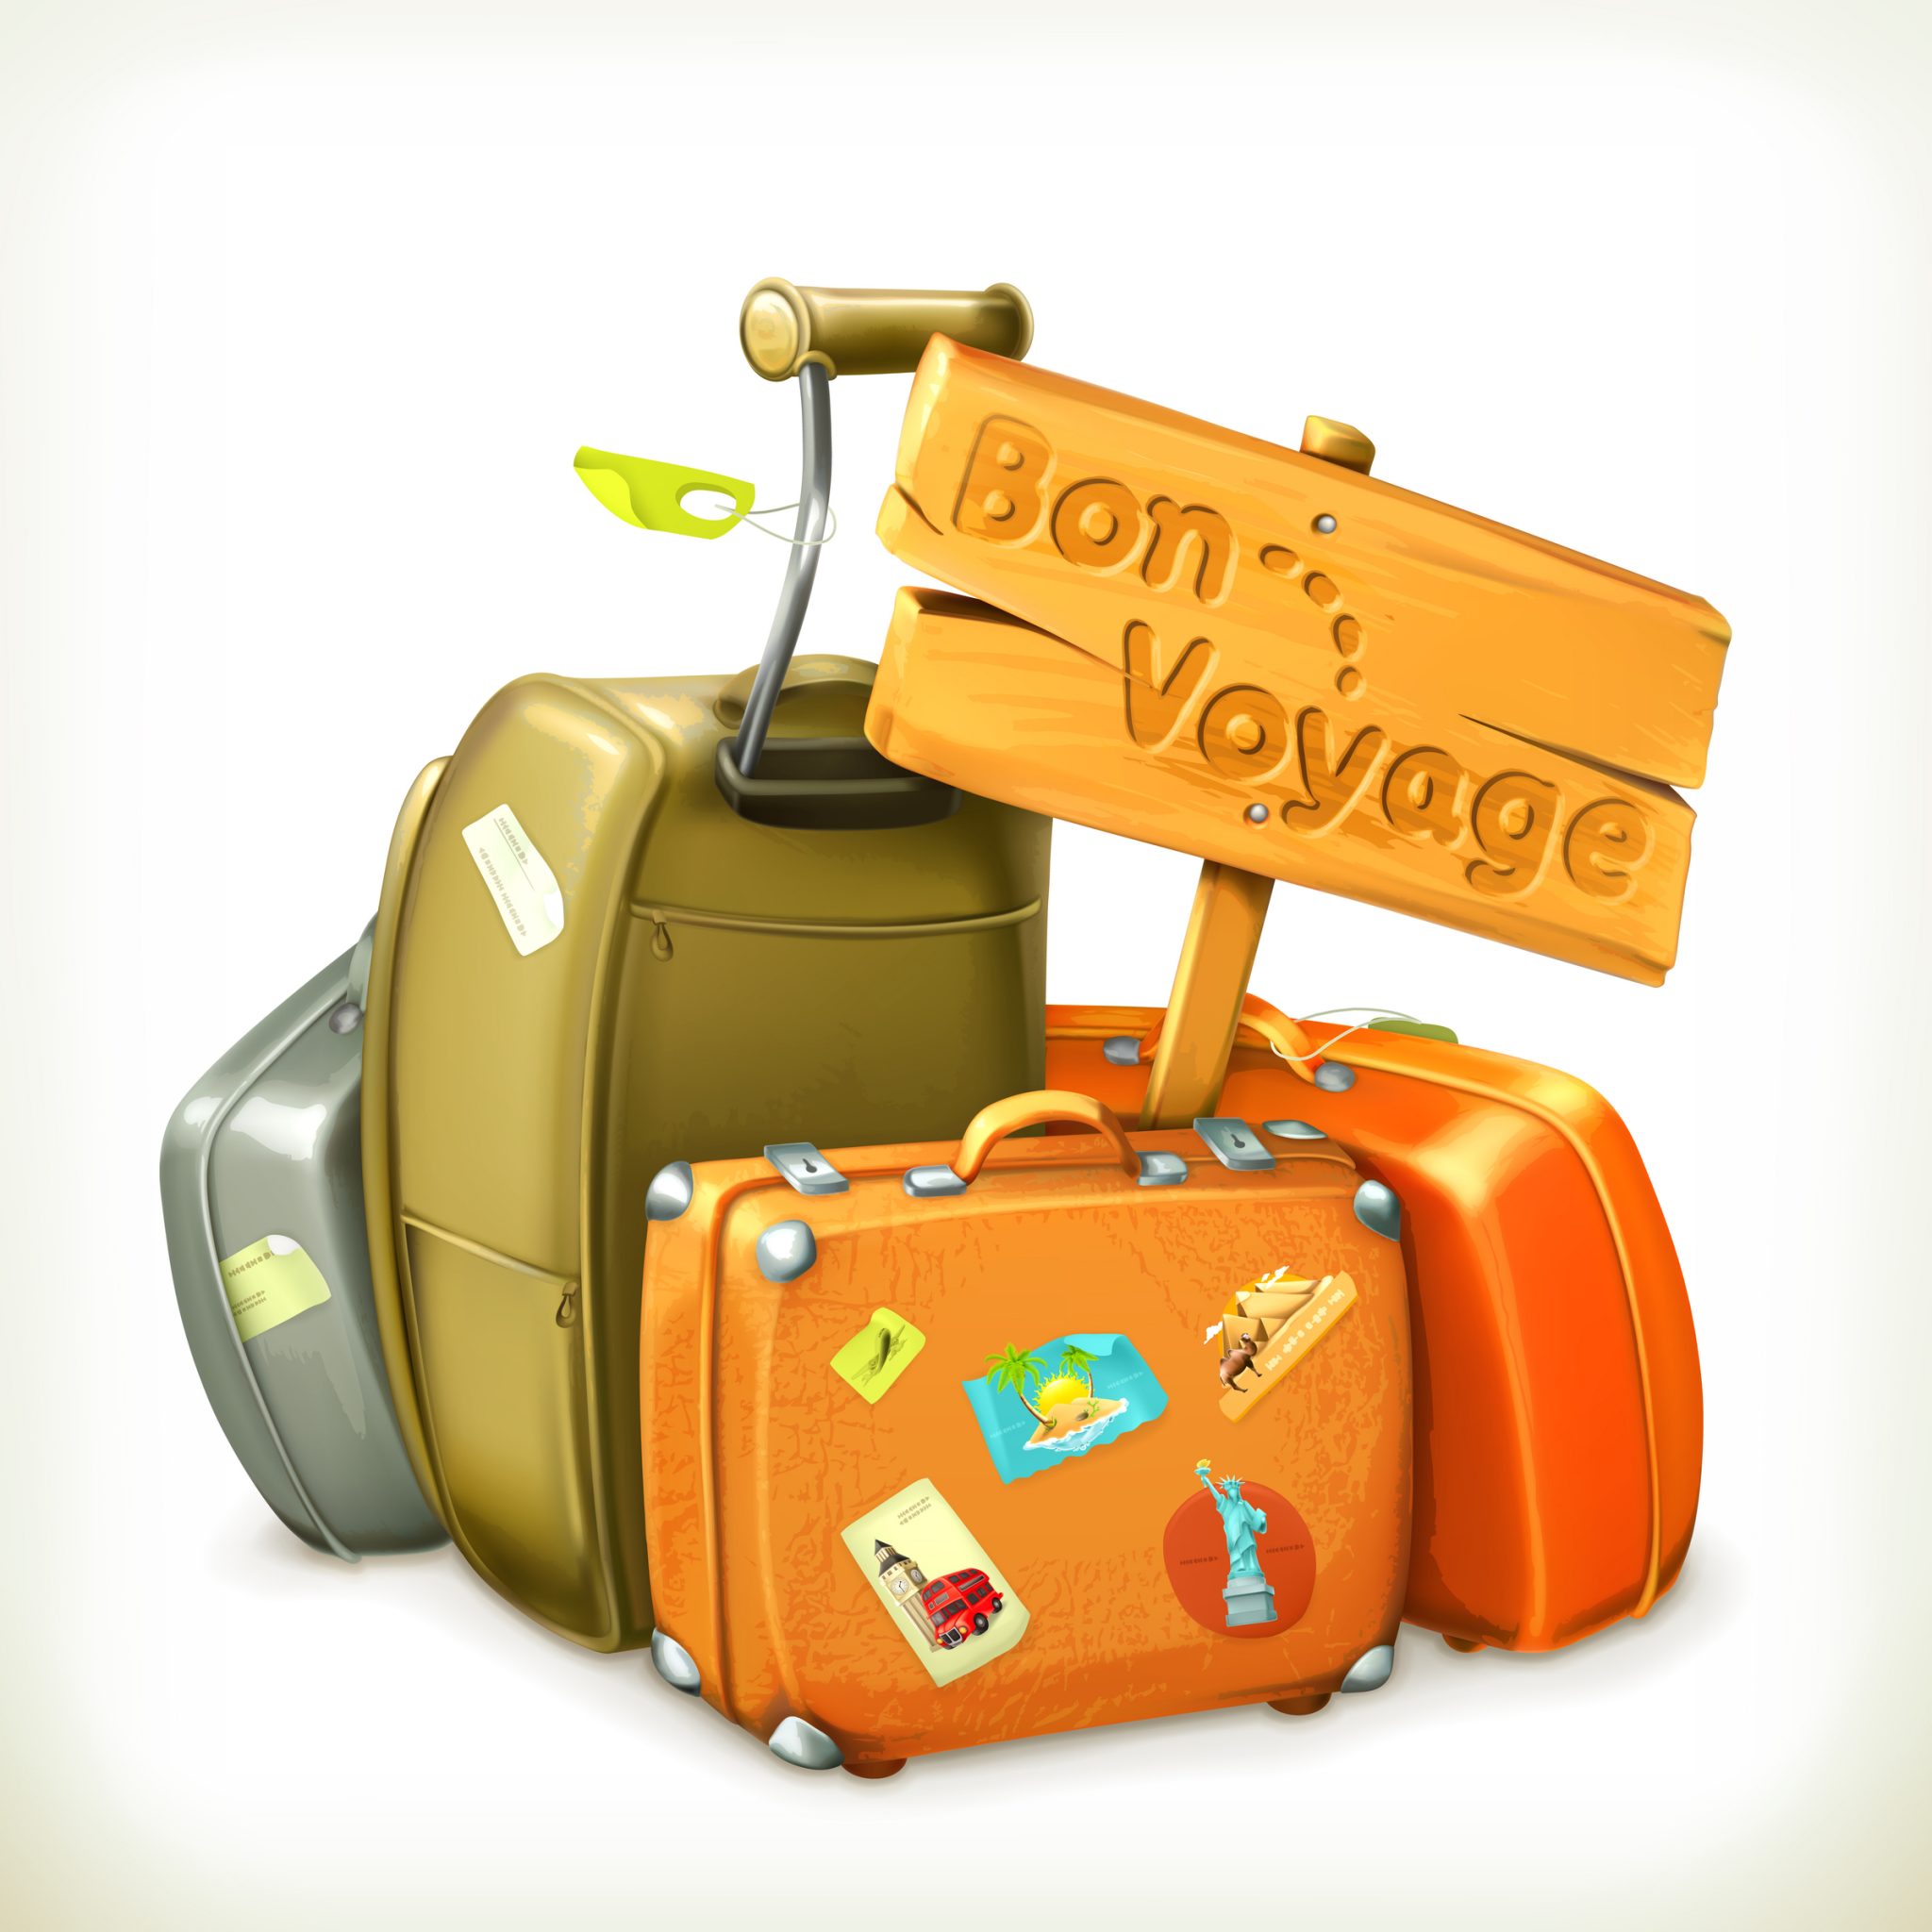 Bon voyage, travel icon, vector illustration - Greater Tampa Bay Area  Council